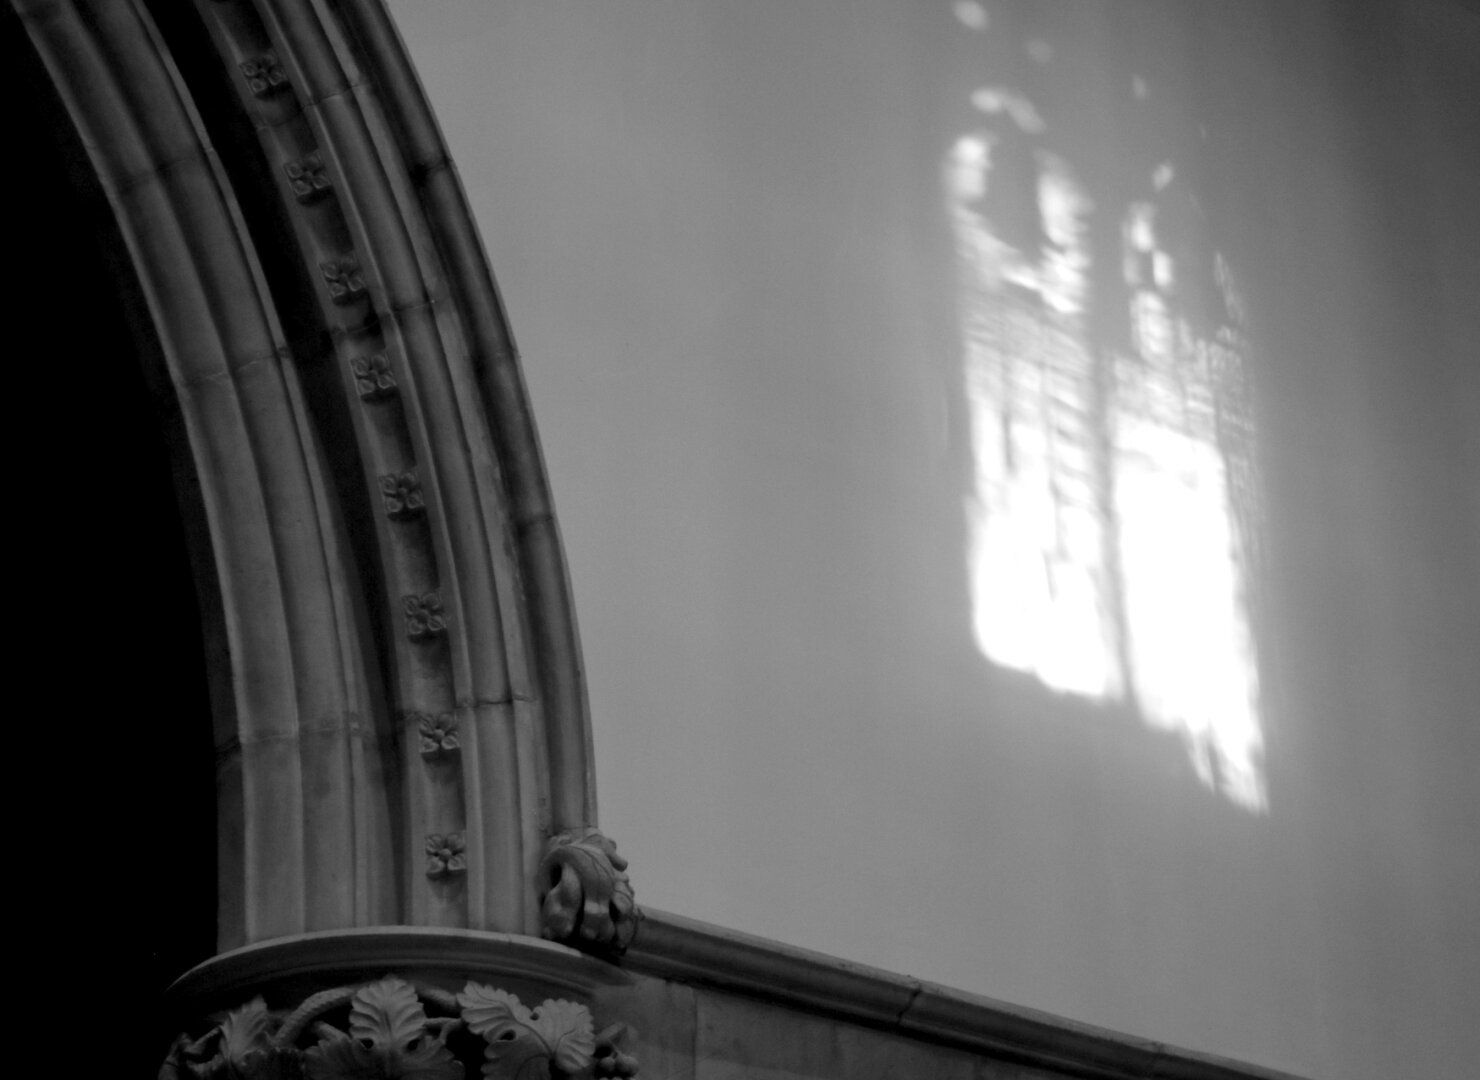 Black and white photography of sunlight projected on a wall, close and to the right of an arched frame decorated with carved flowers. The sun is coming through an unseen window on the opposite wall.